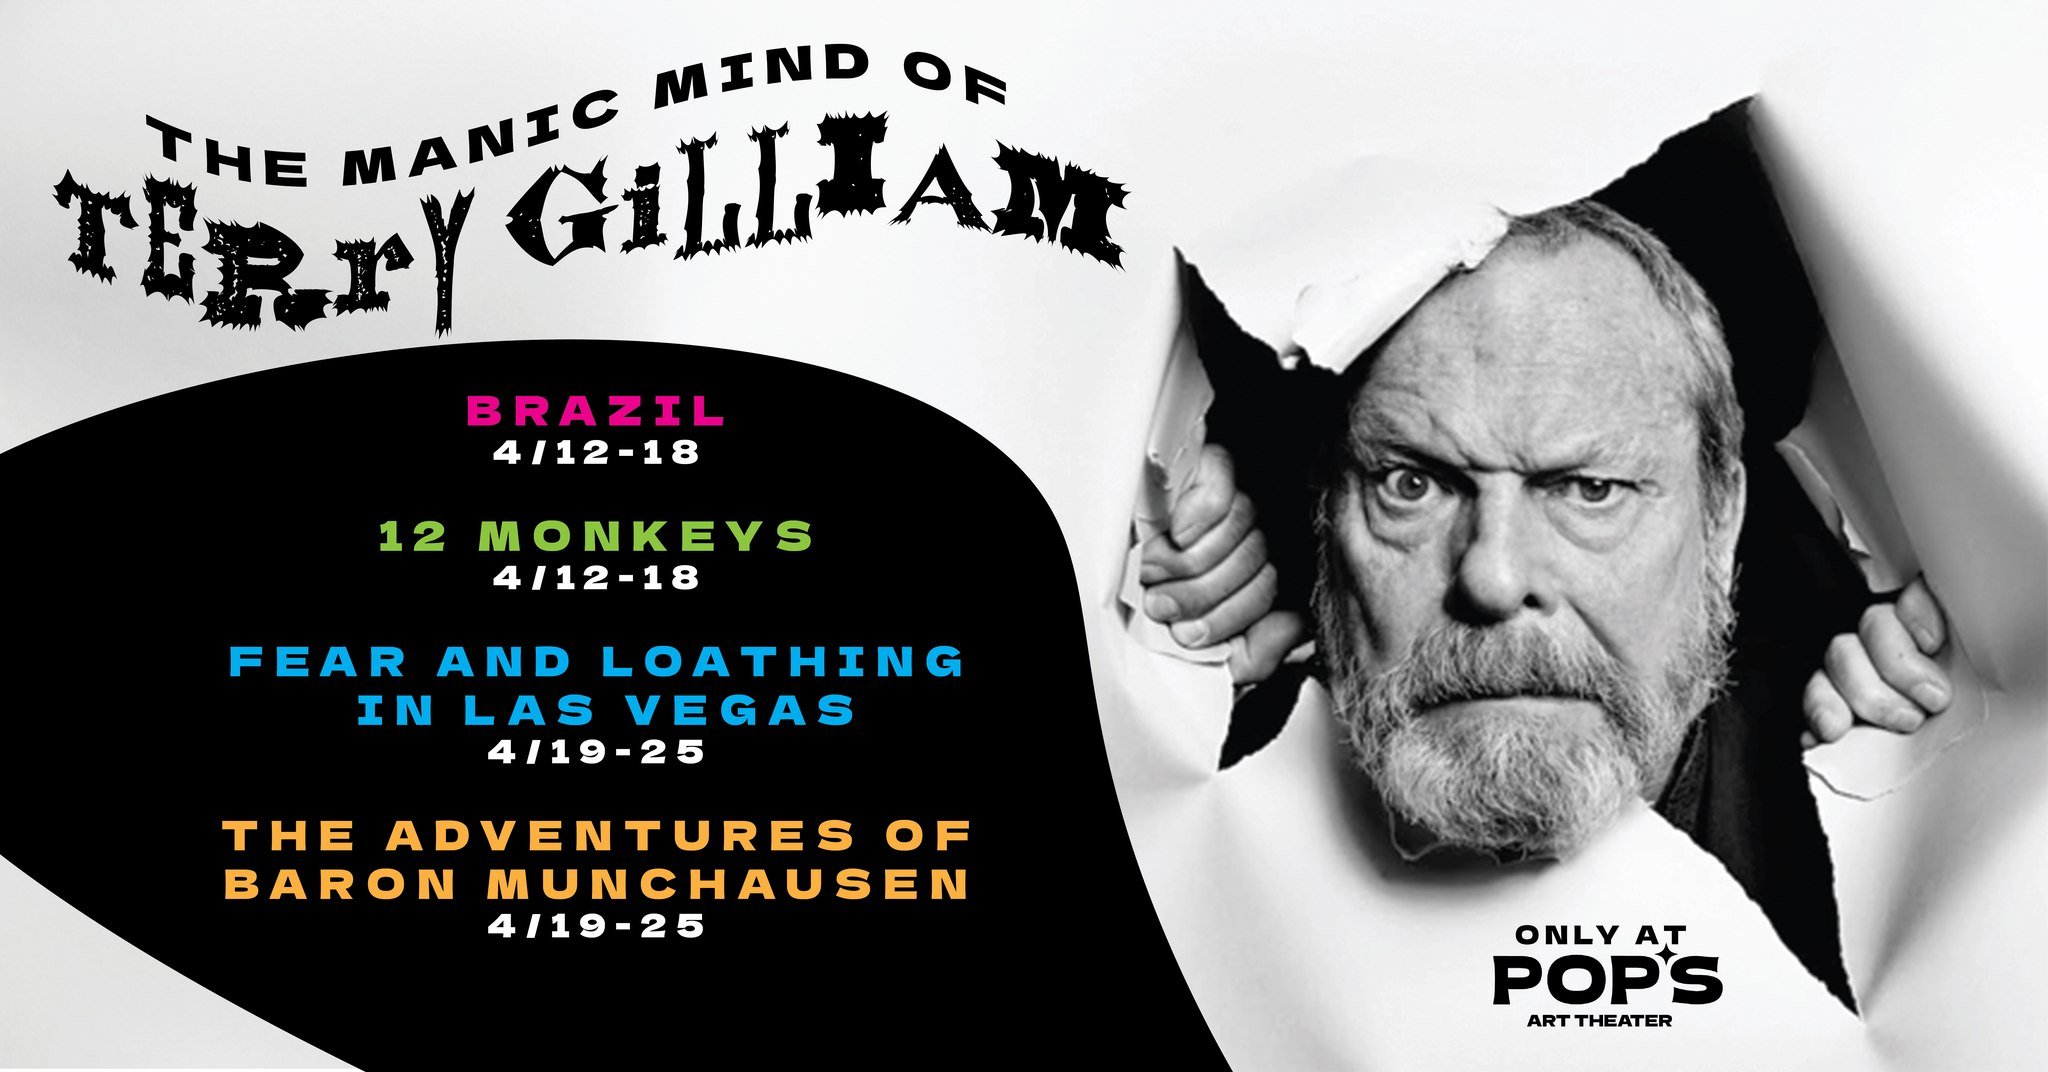 April Series: The Manic Mind of Terry Gilliam